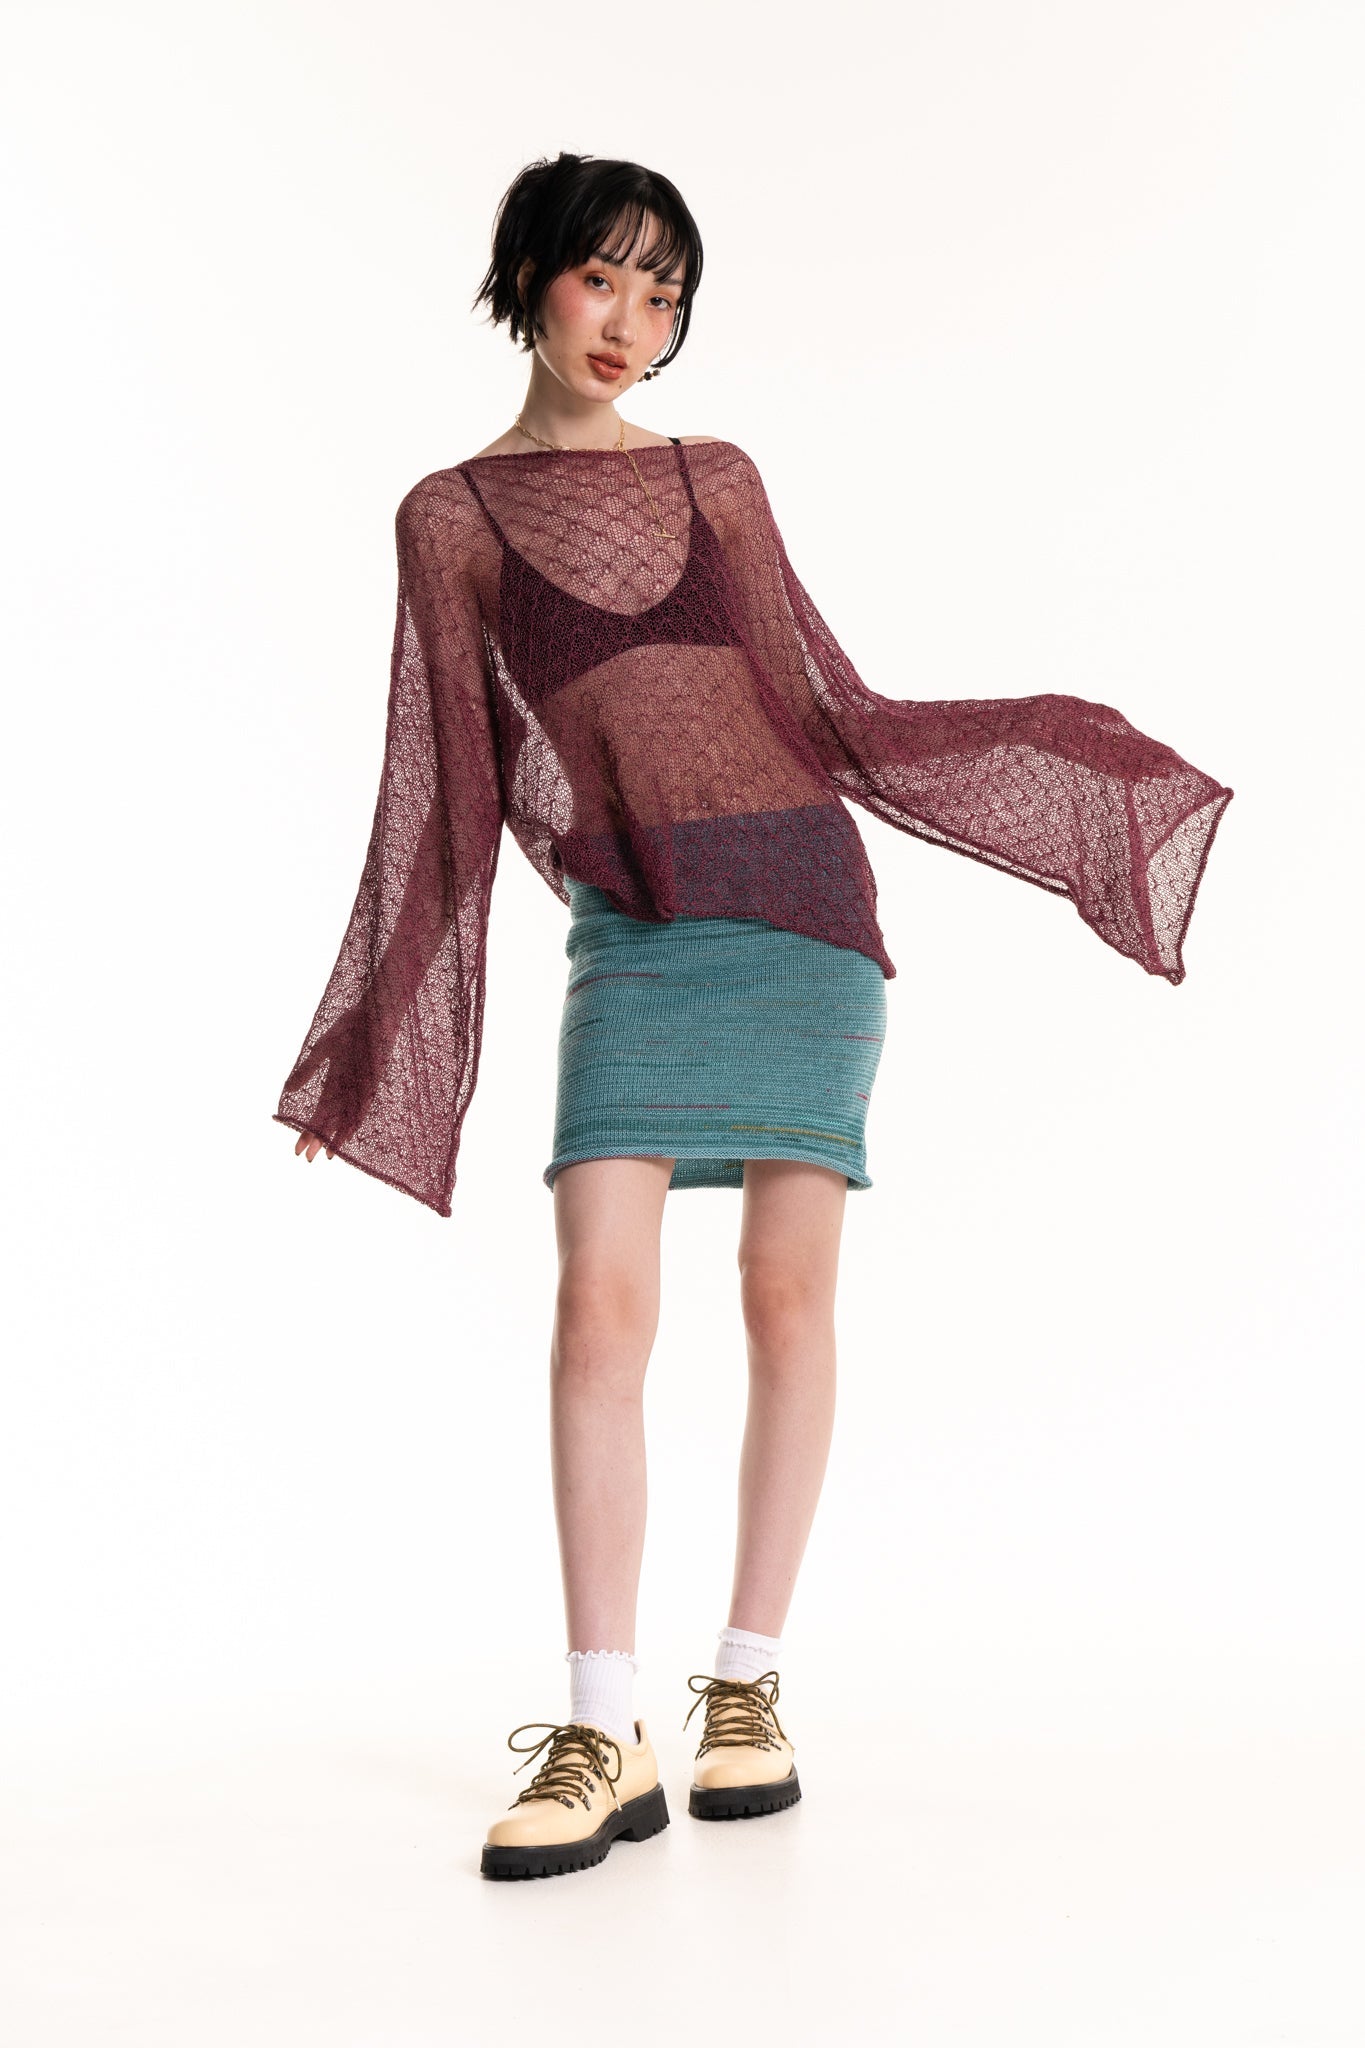 Tuck-Lace Sheer Knit Sweater - heyzoemay